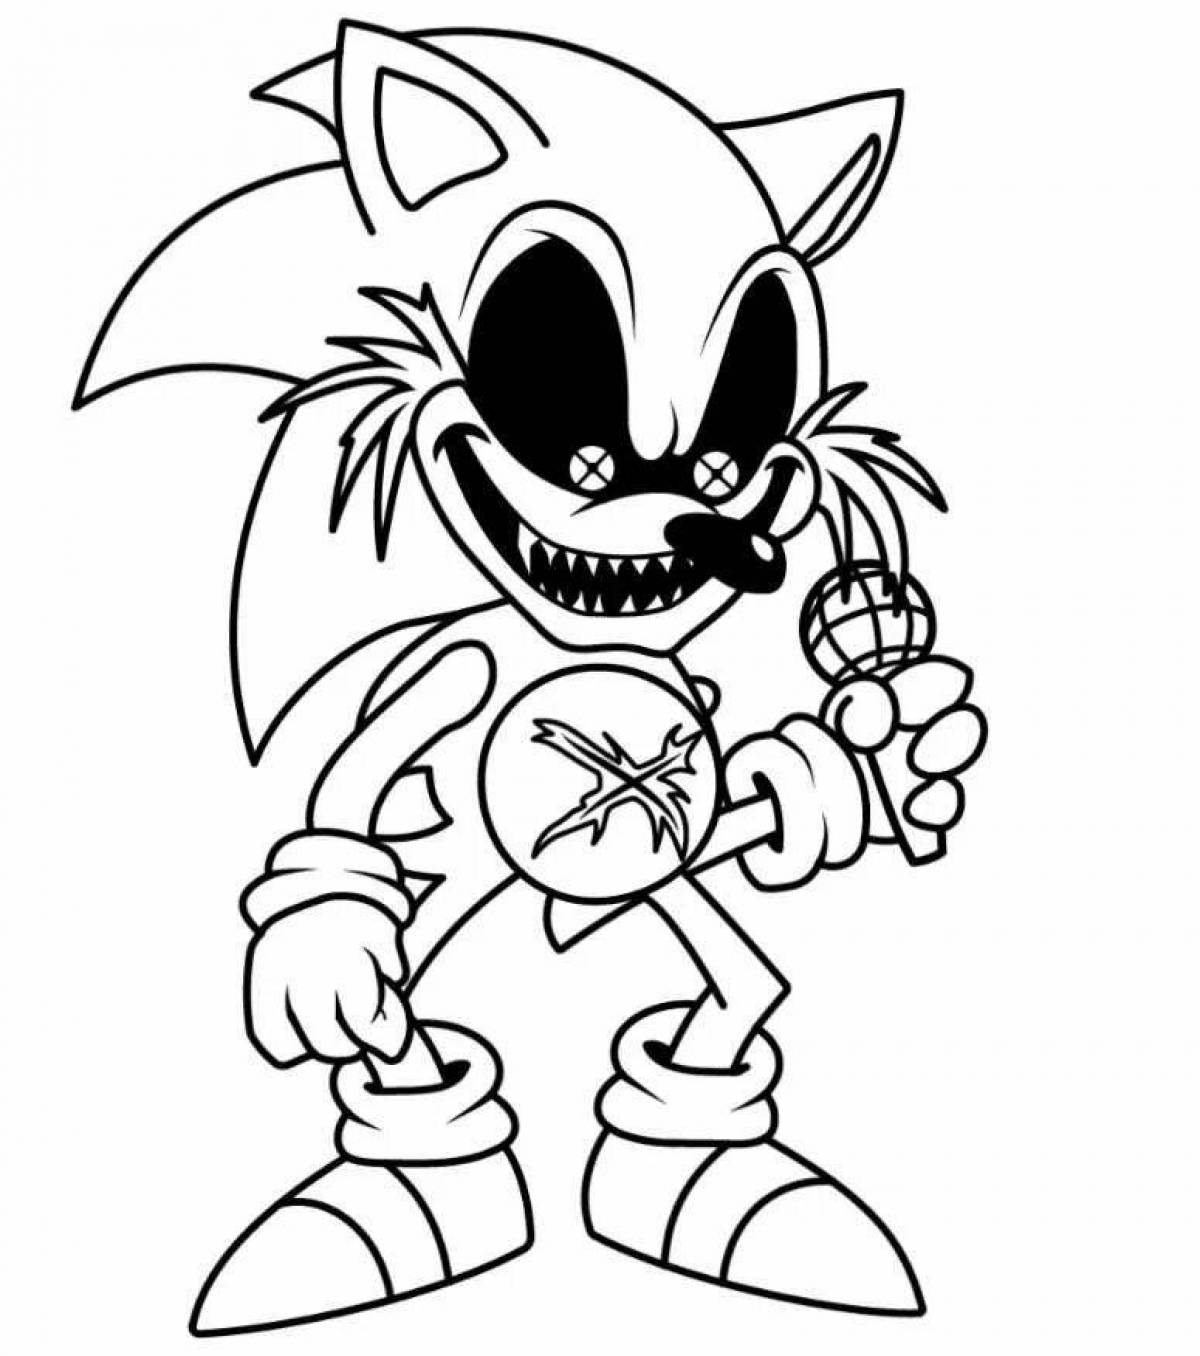 Abominable Sonic coloring page